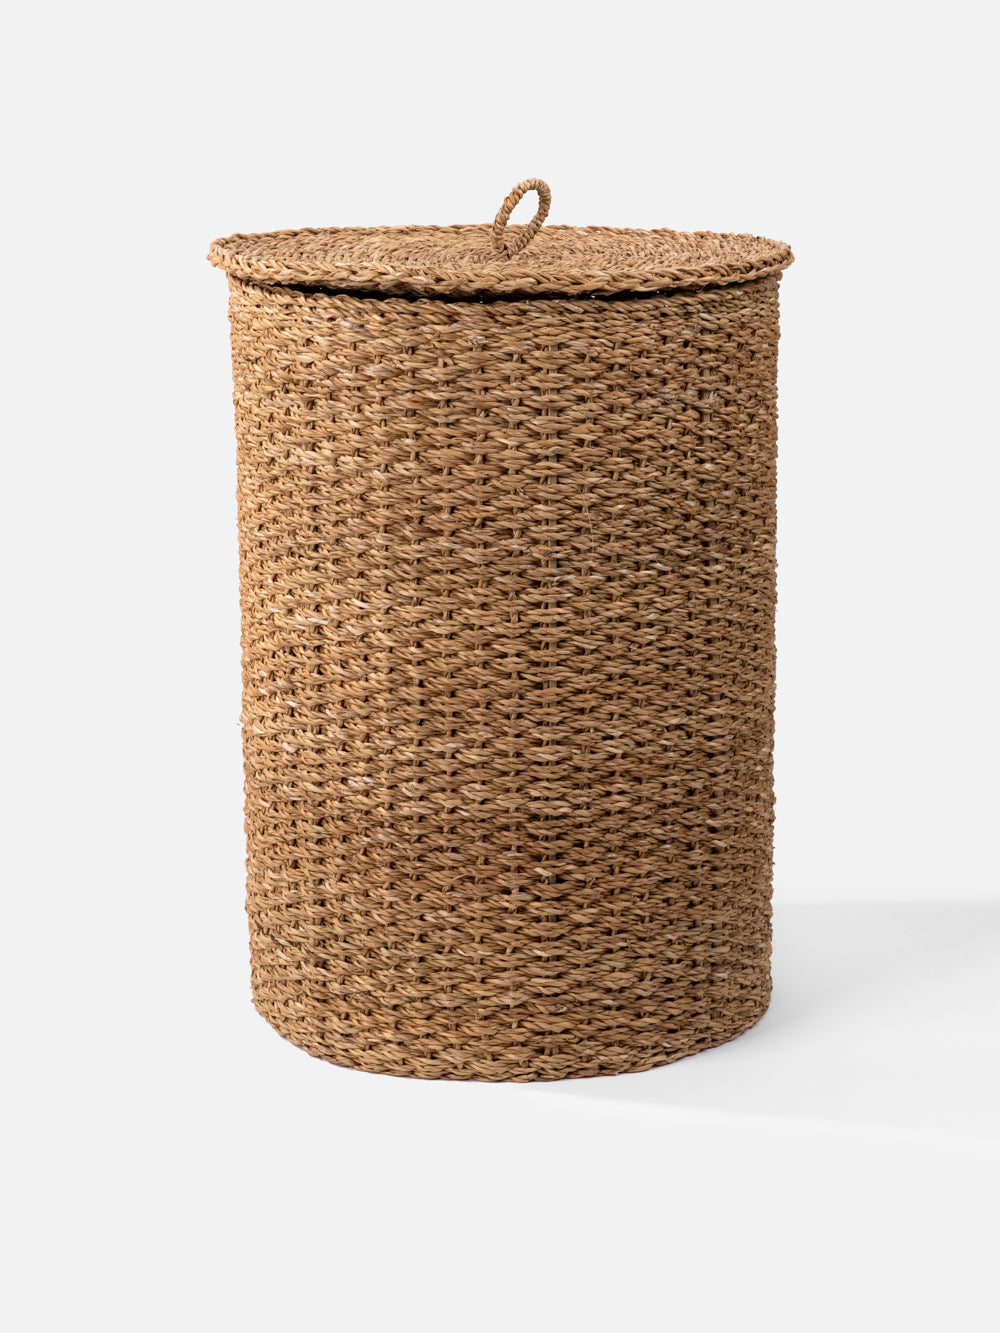 ALIBABA Woven Hamper with Lid